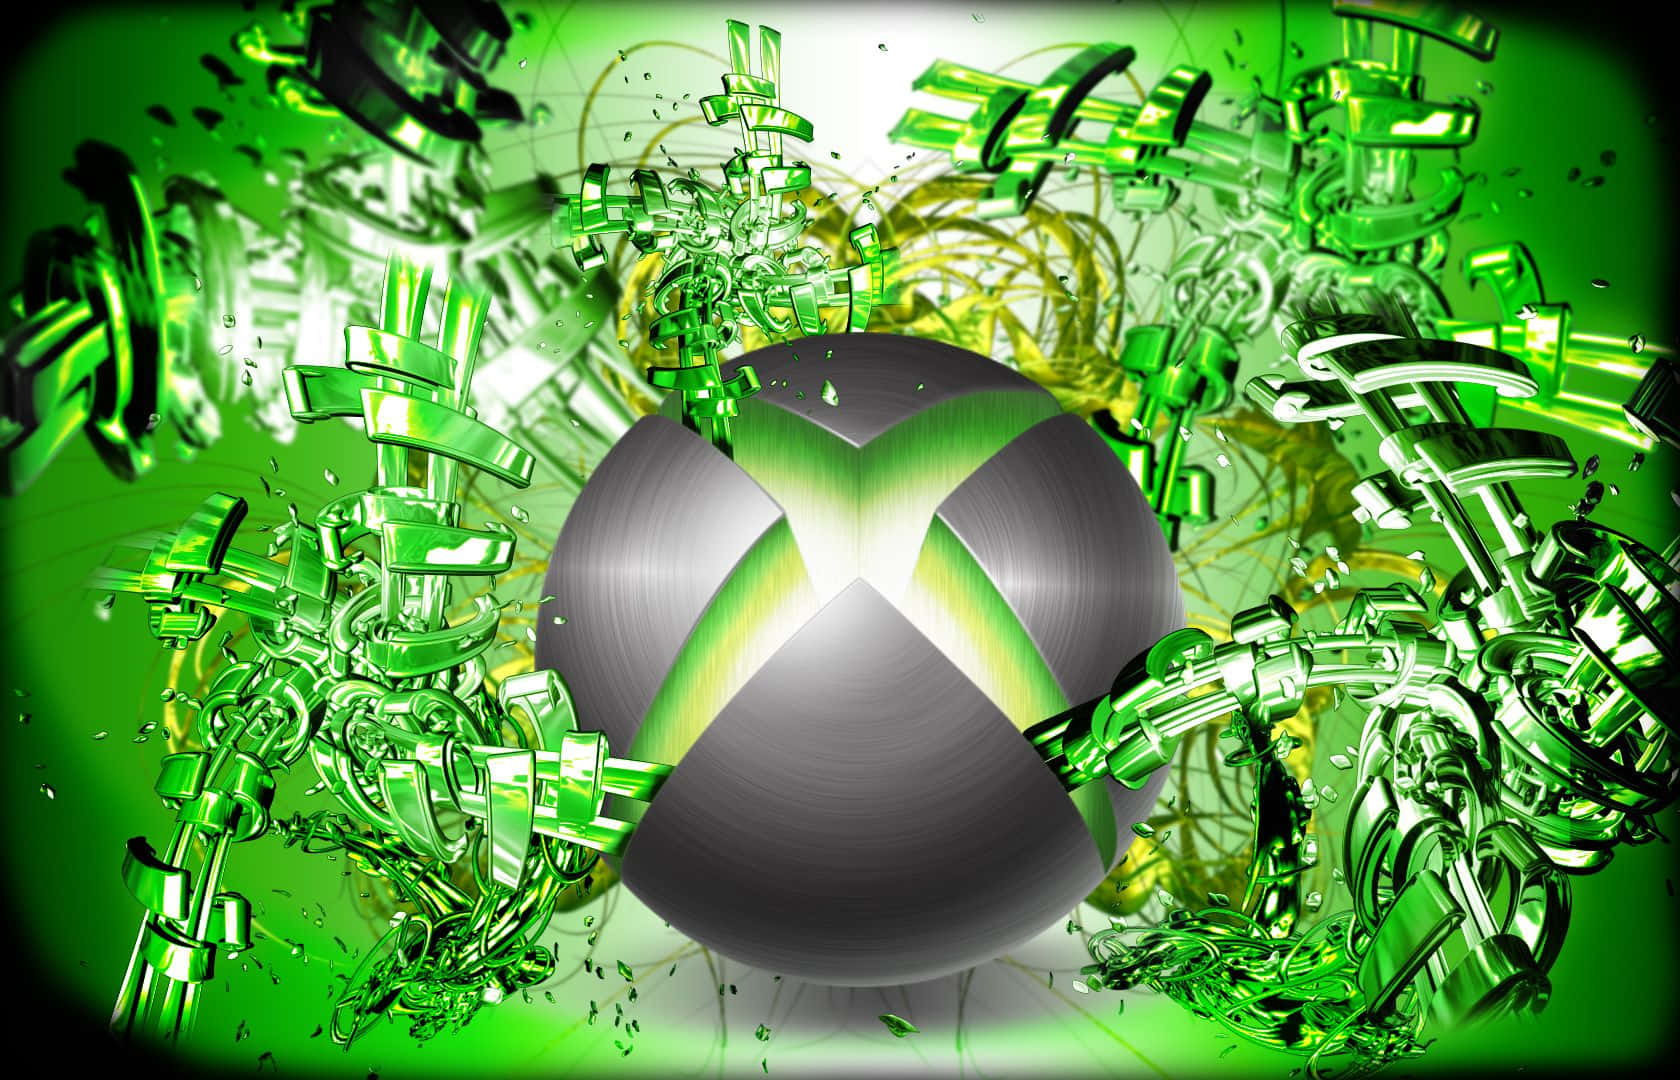 Enjoy The Best Of Gaming With The Cool Xbox Console Wallpaper